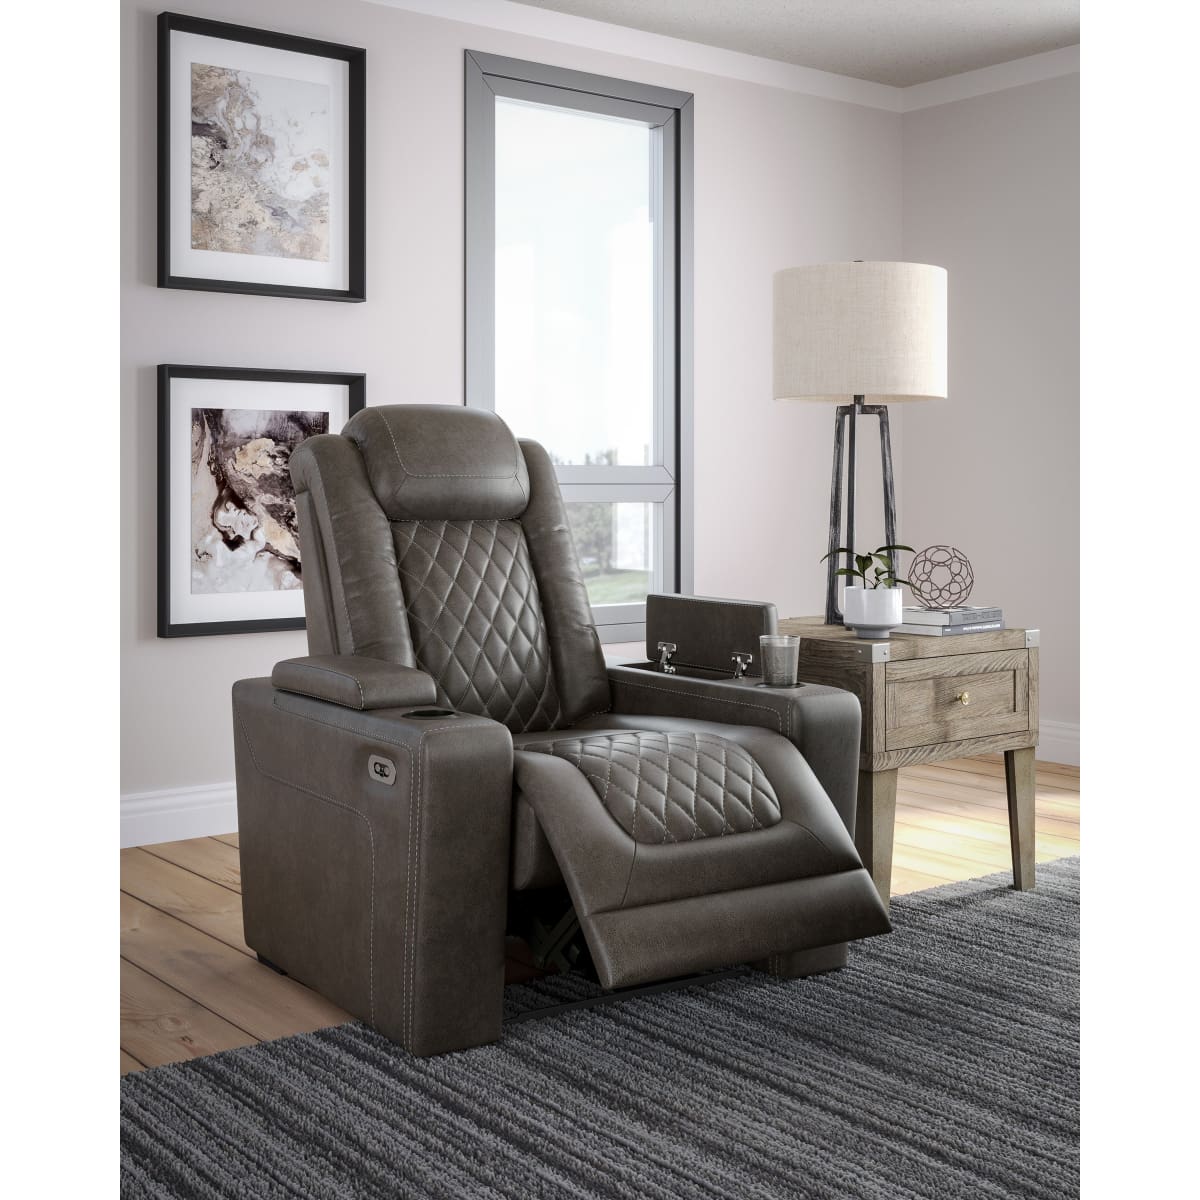 HyllMon tPower Recliner - accent-chairs